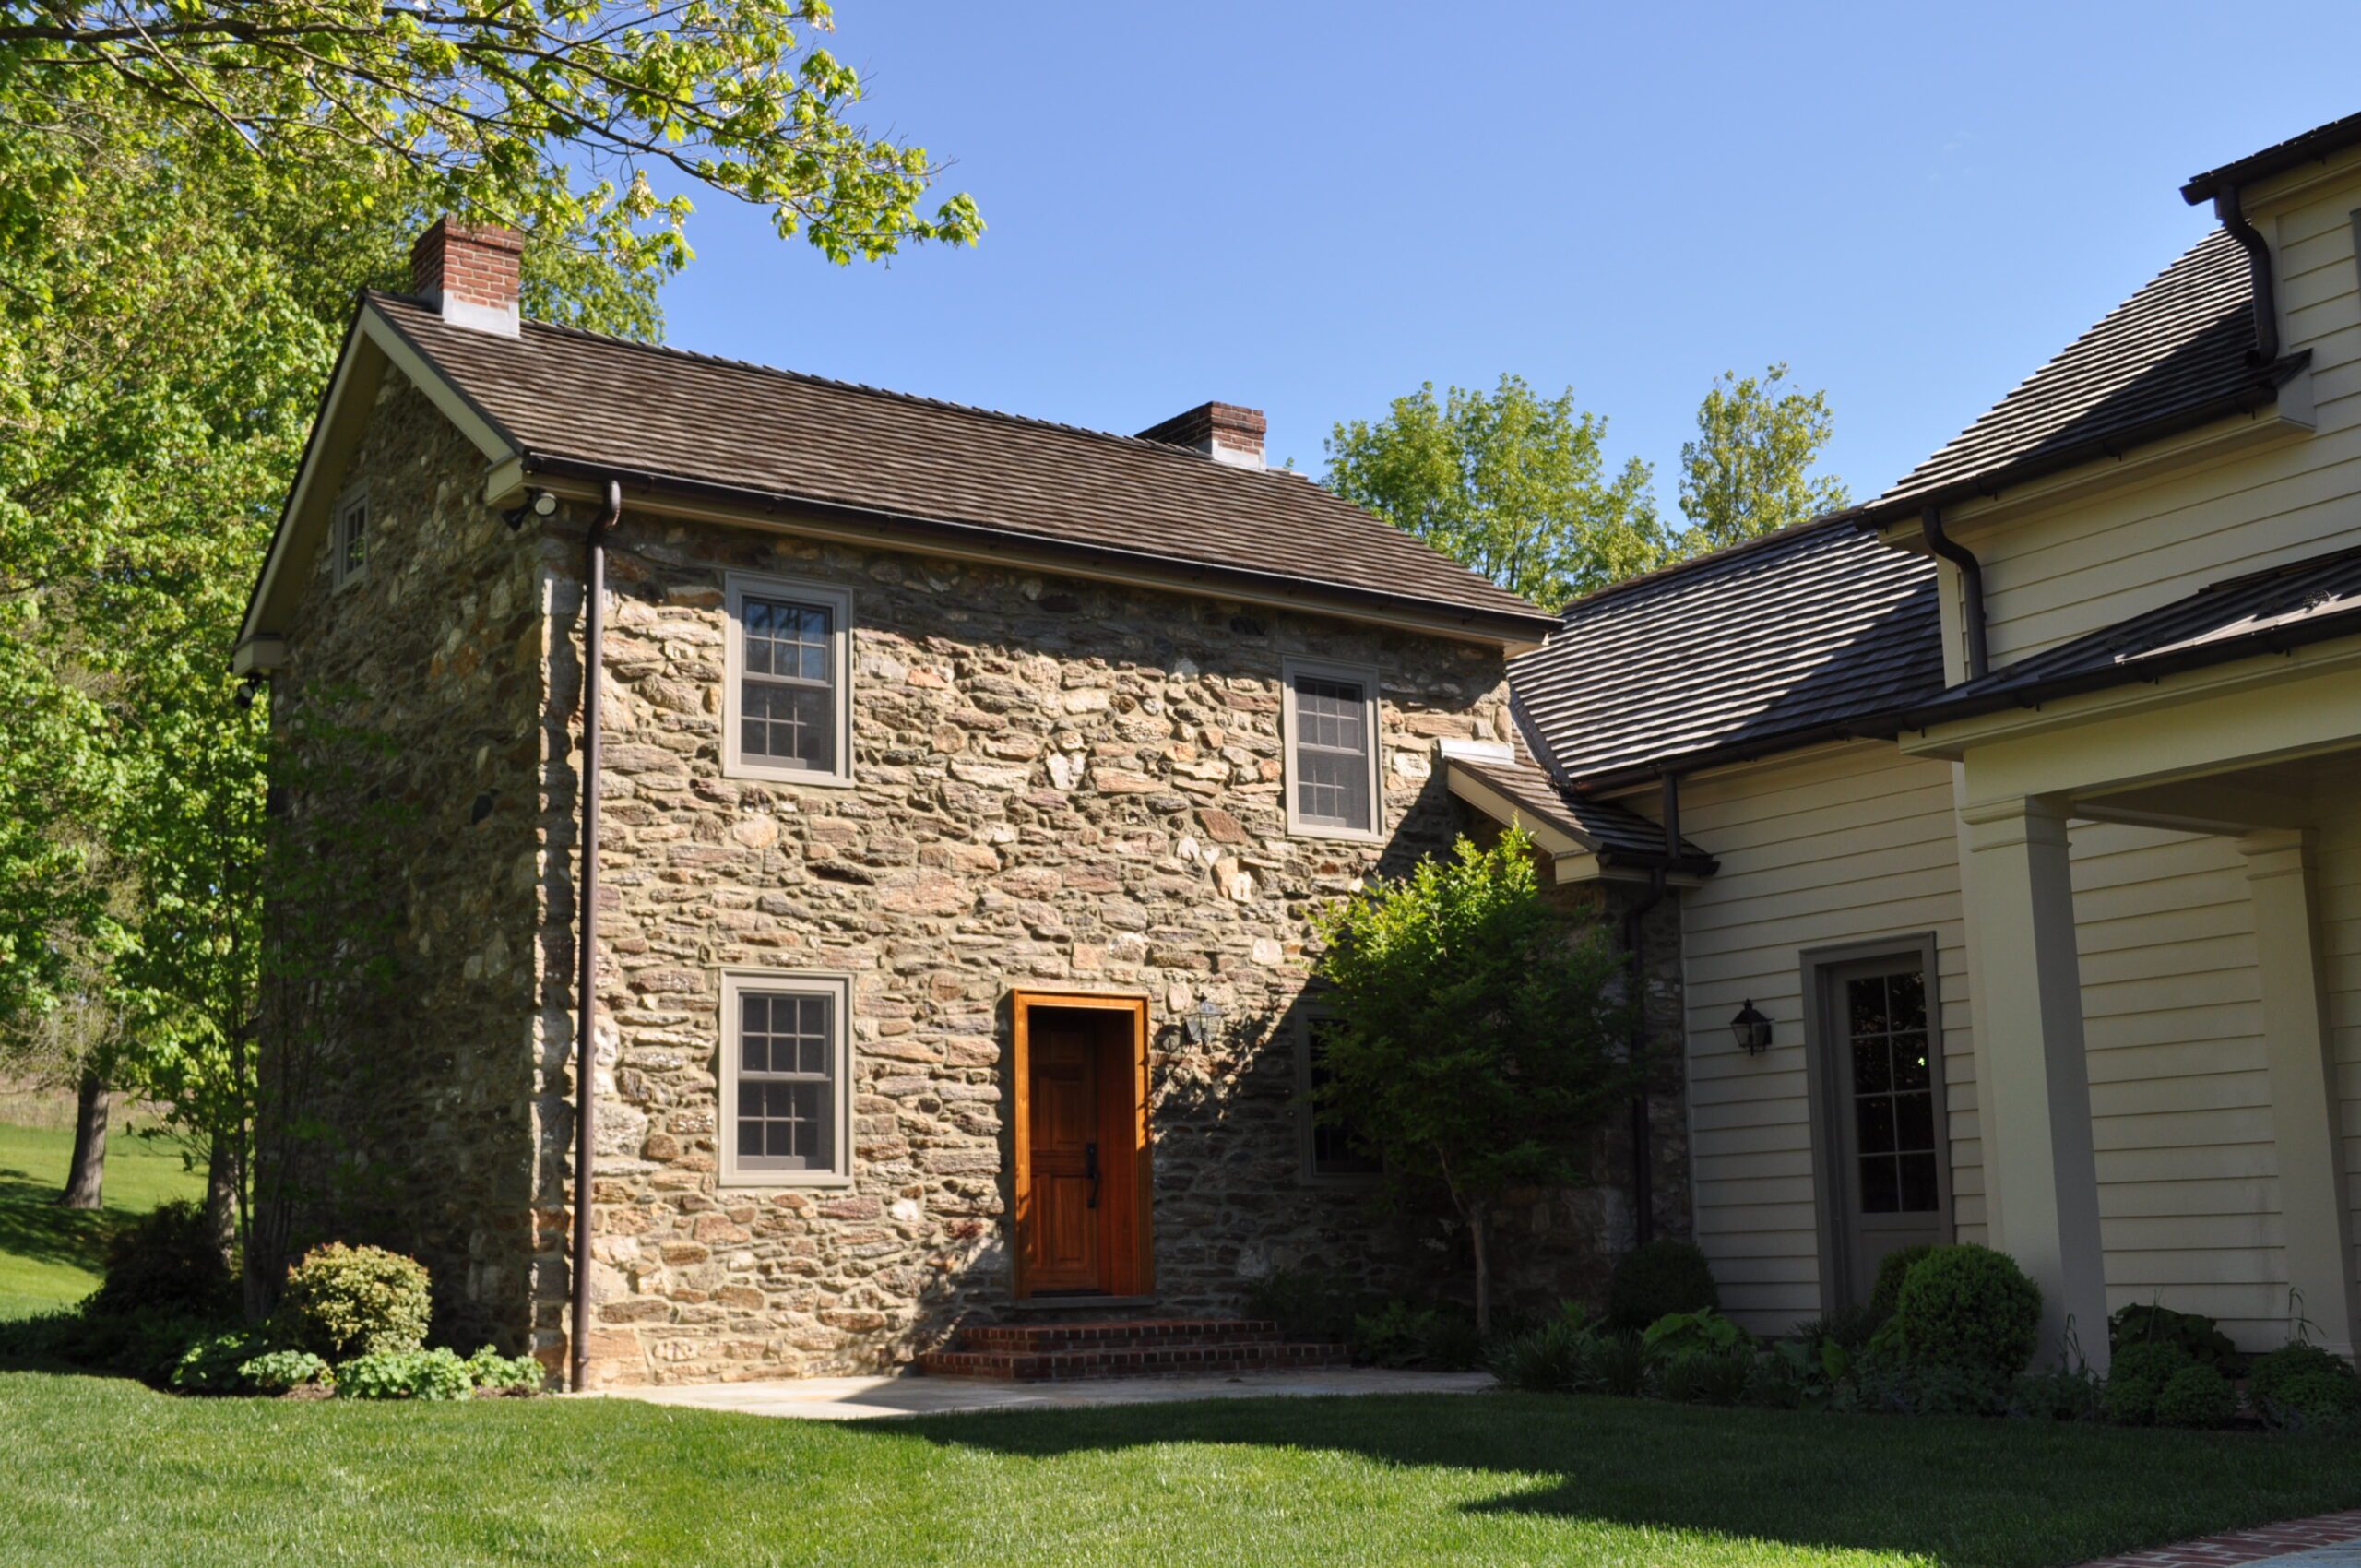 Solebury Home Remodeling with Historic Restoration with 4000 sq addition to right